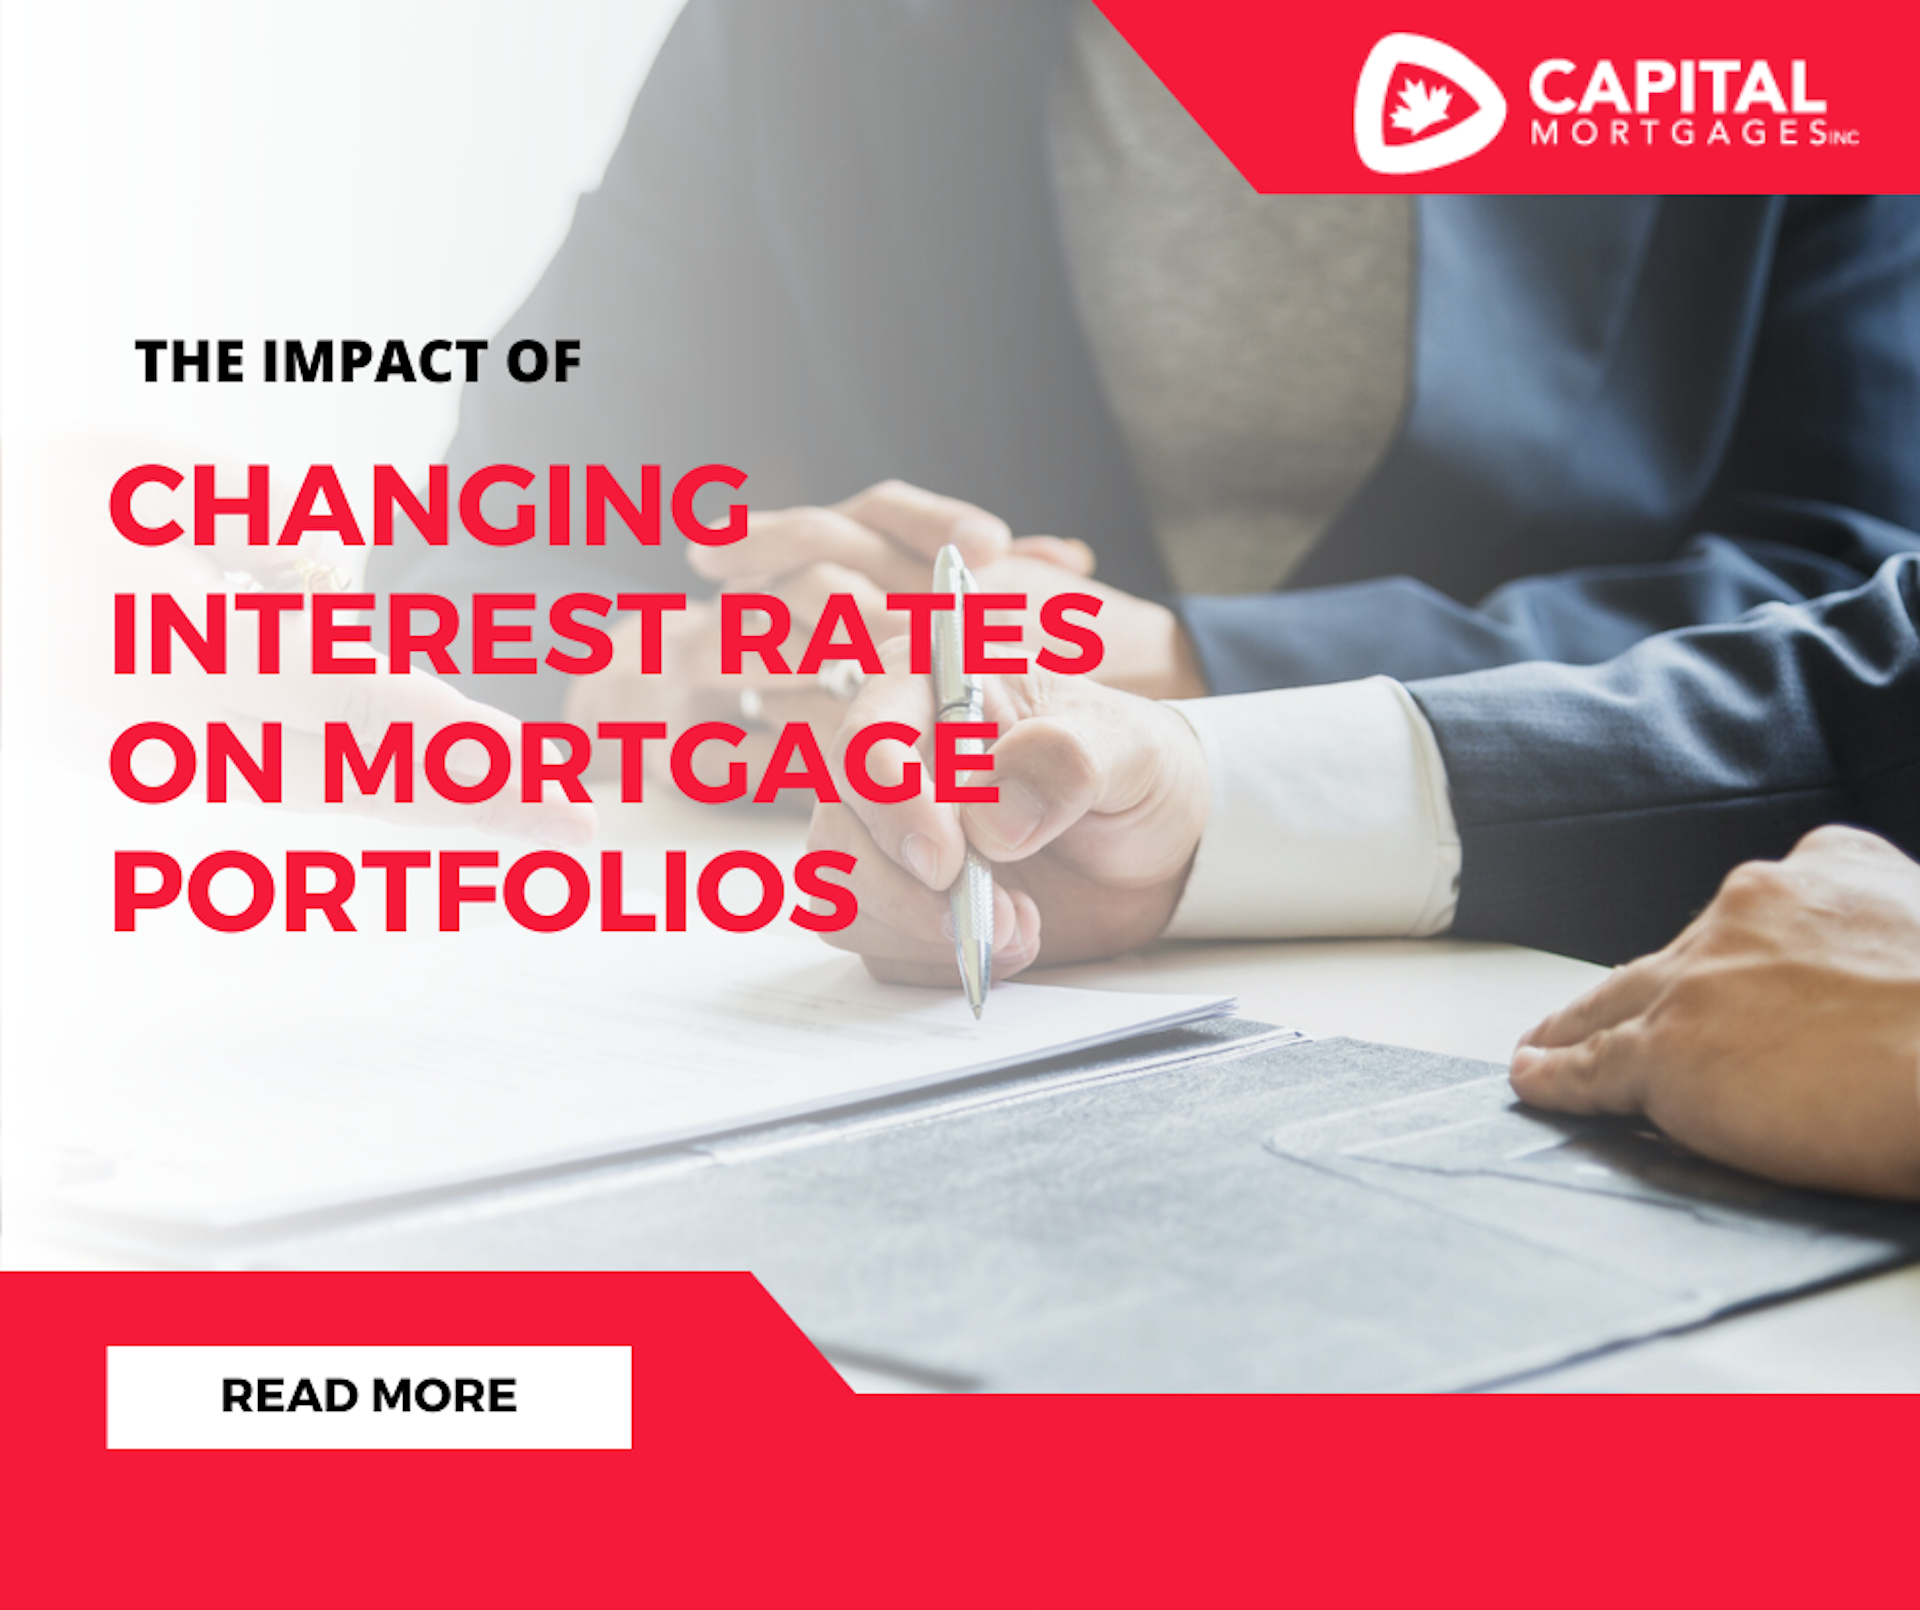 The Impact of Changing Interest Rates on Mortgage Portfolios